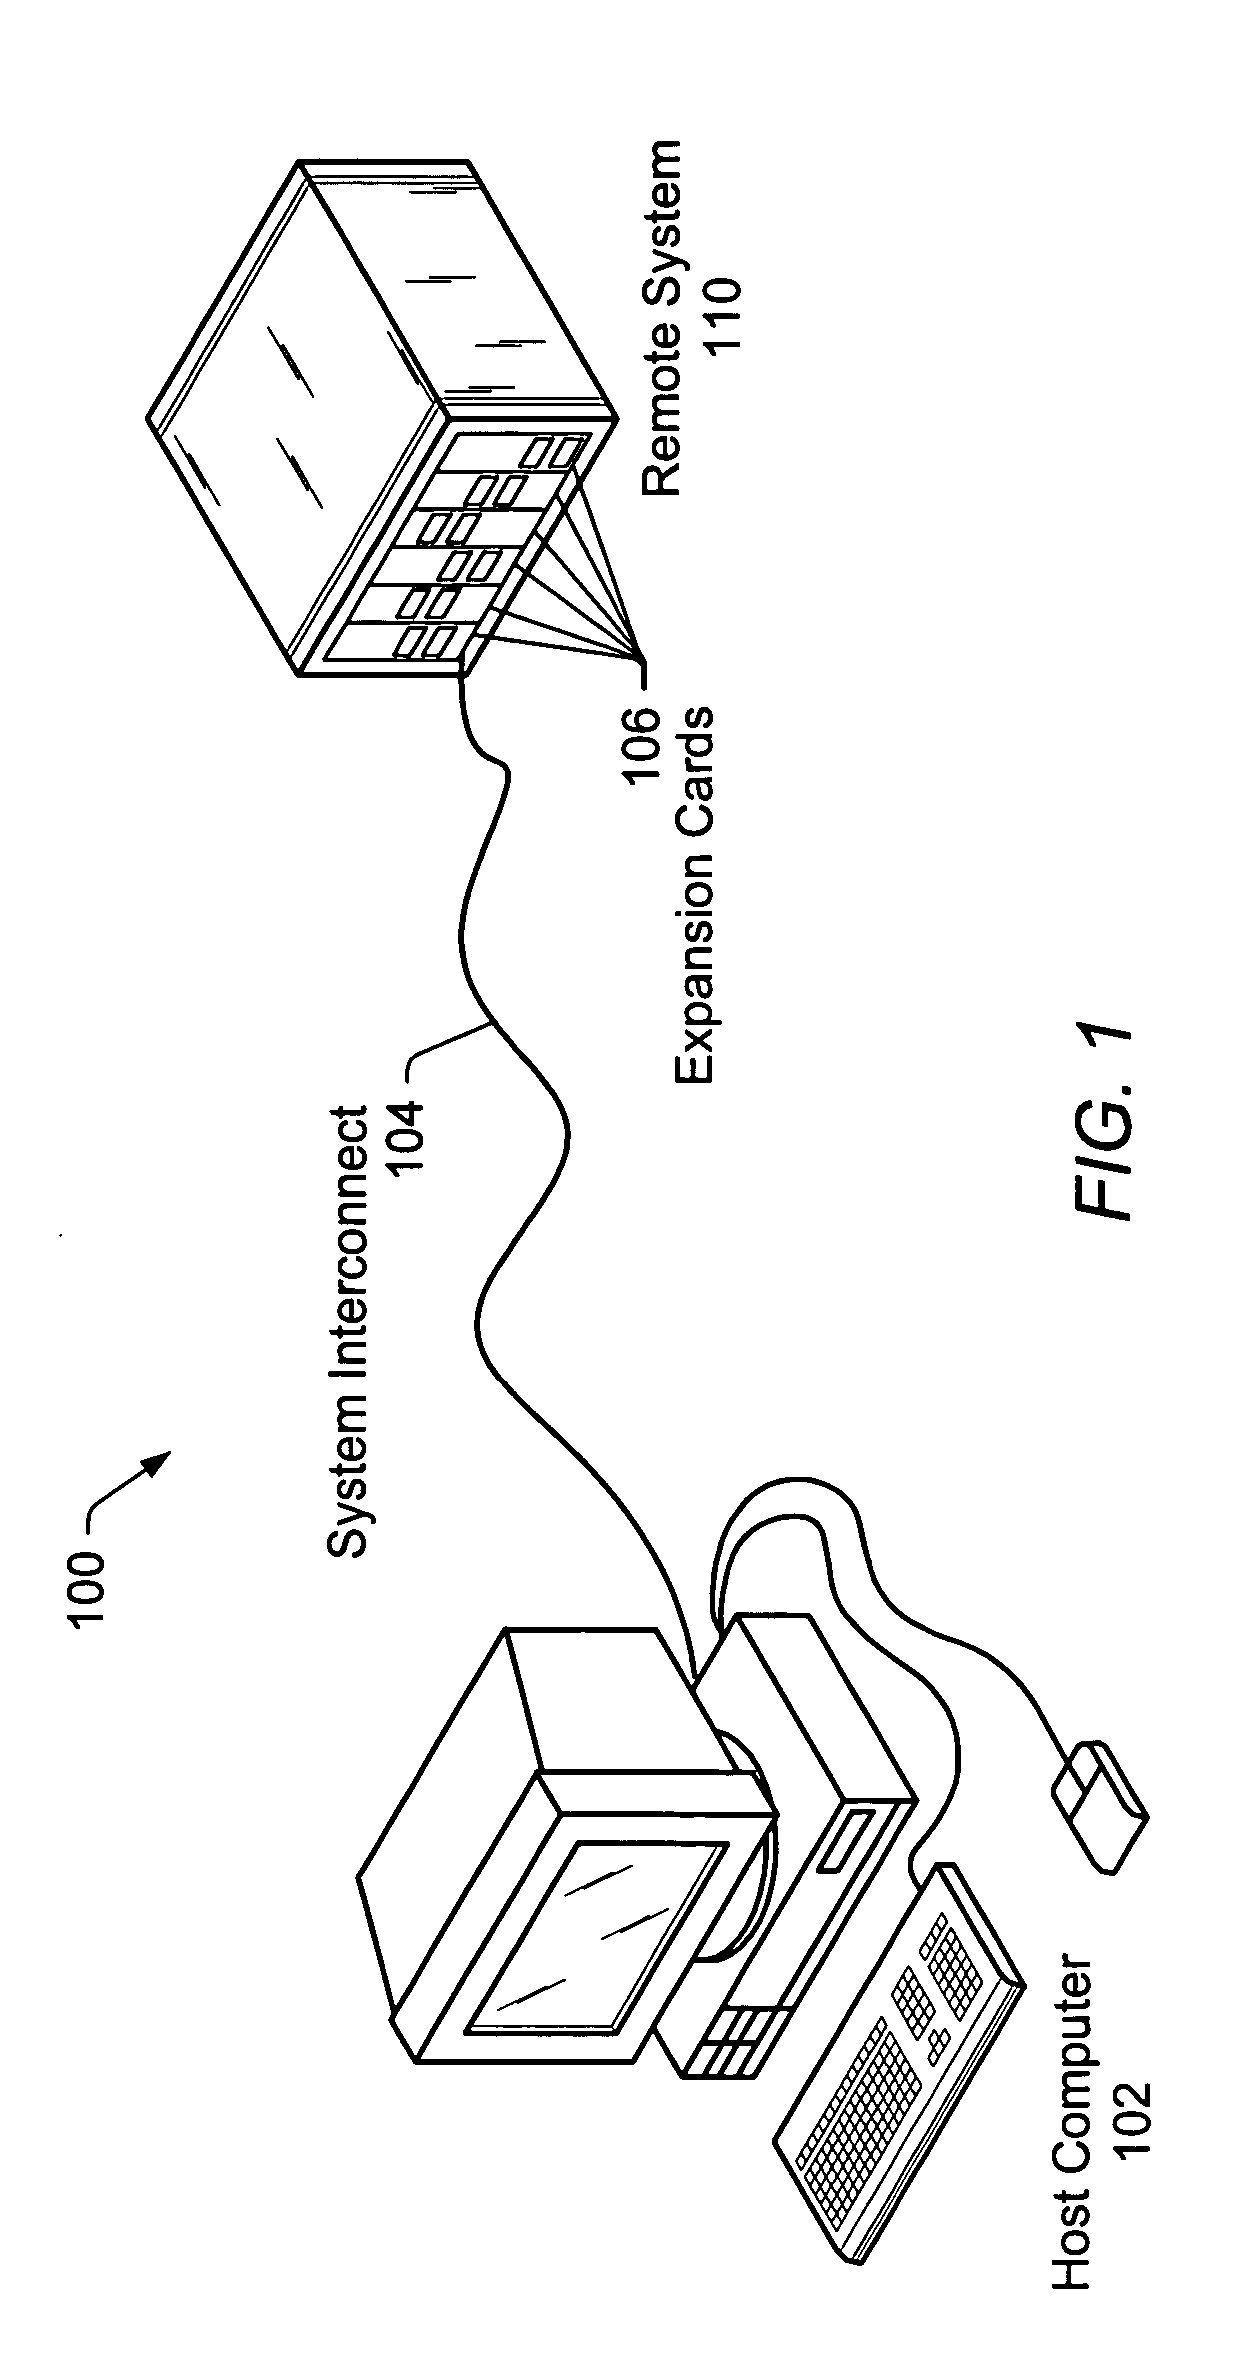 System and method for in-line consistency checking of packetized data